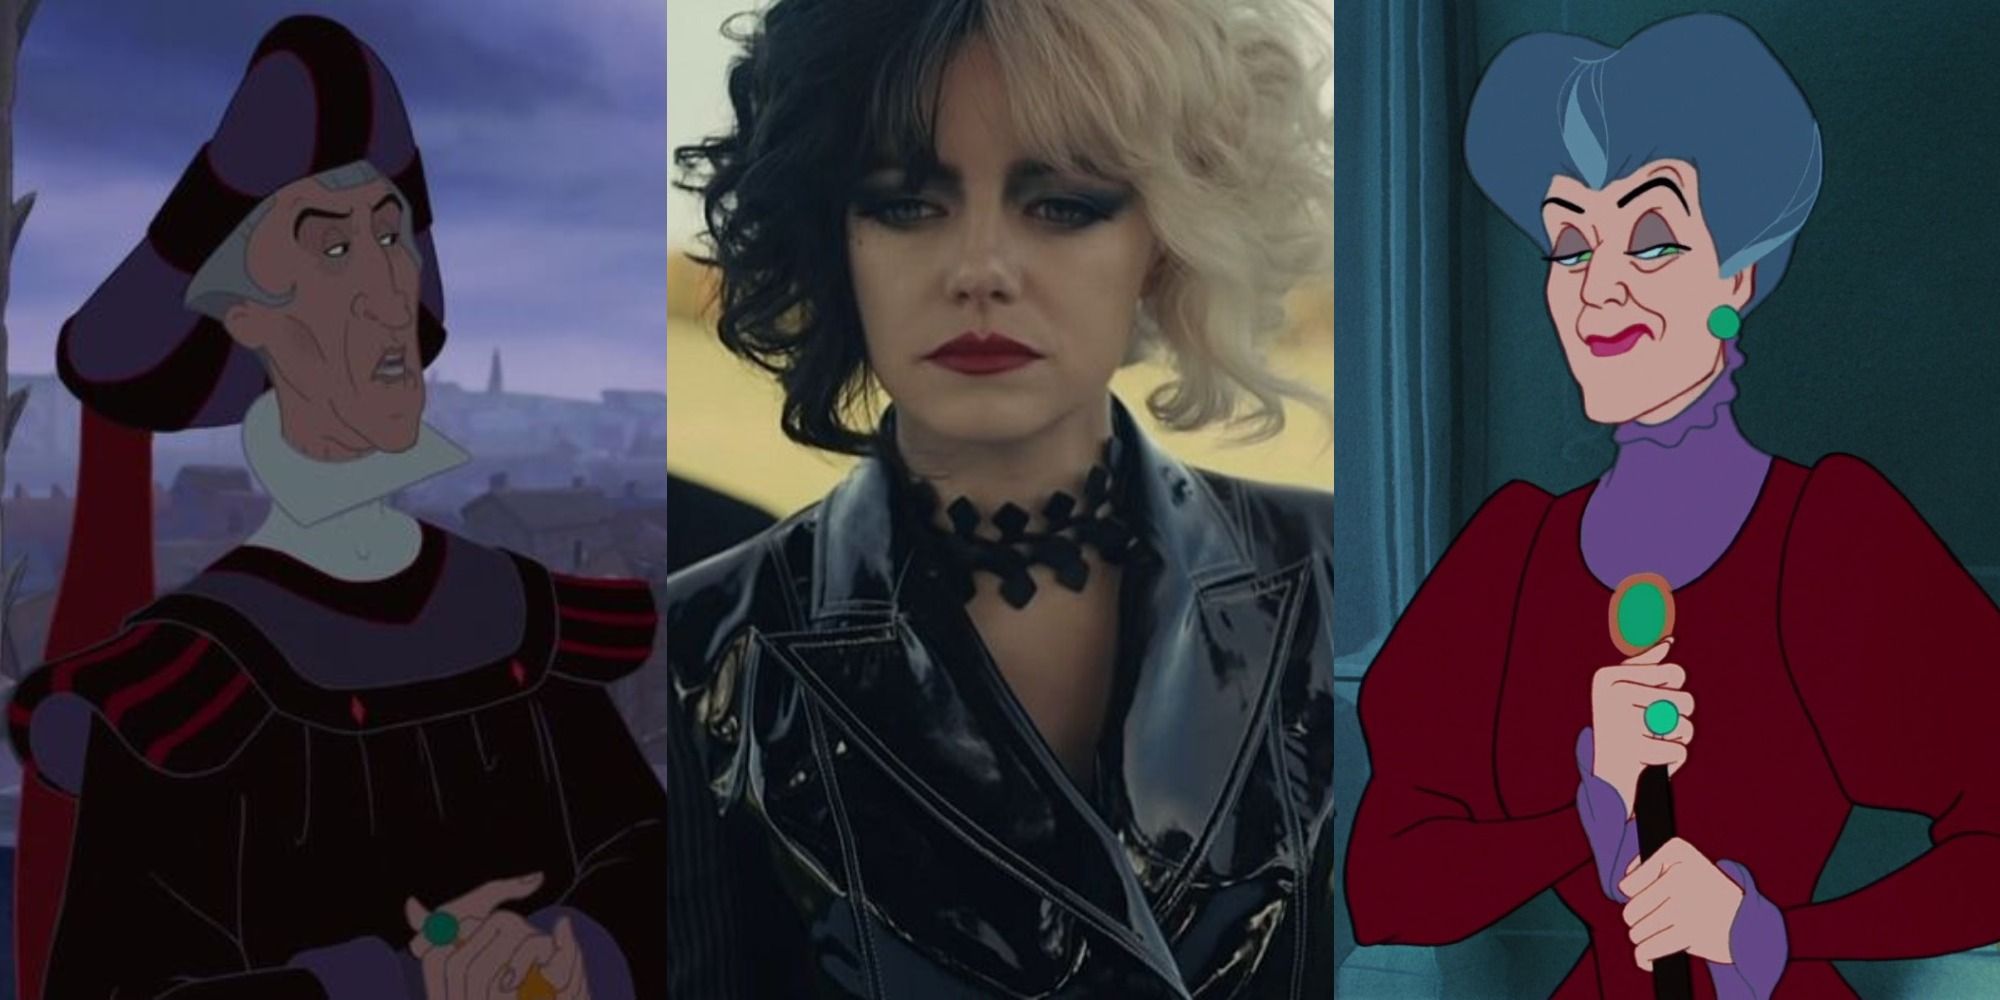 Cruella 5 Disney Villains That Could Also Be Redeemed (& 5 That Are Too Evil)